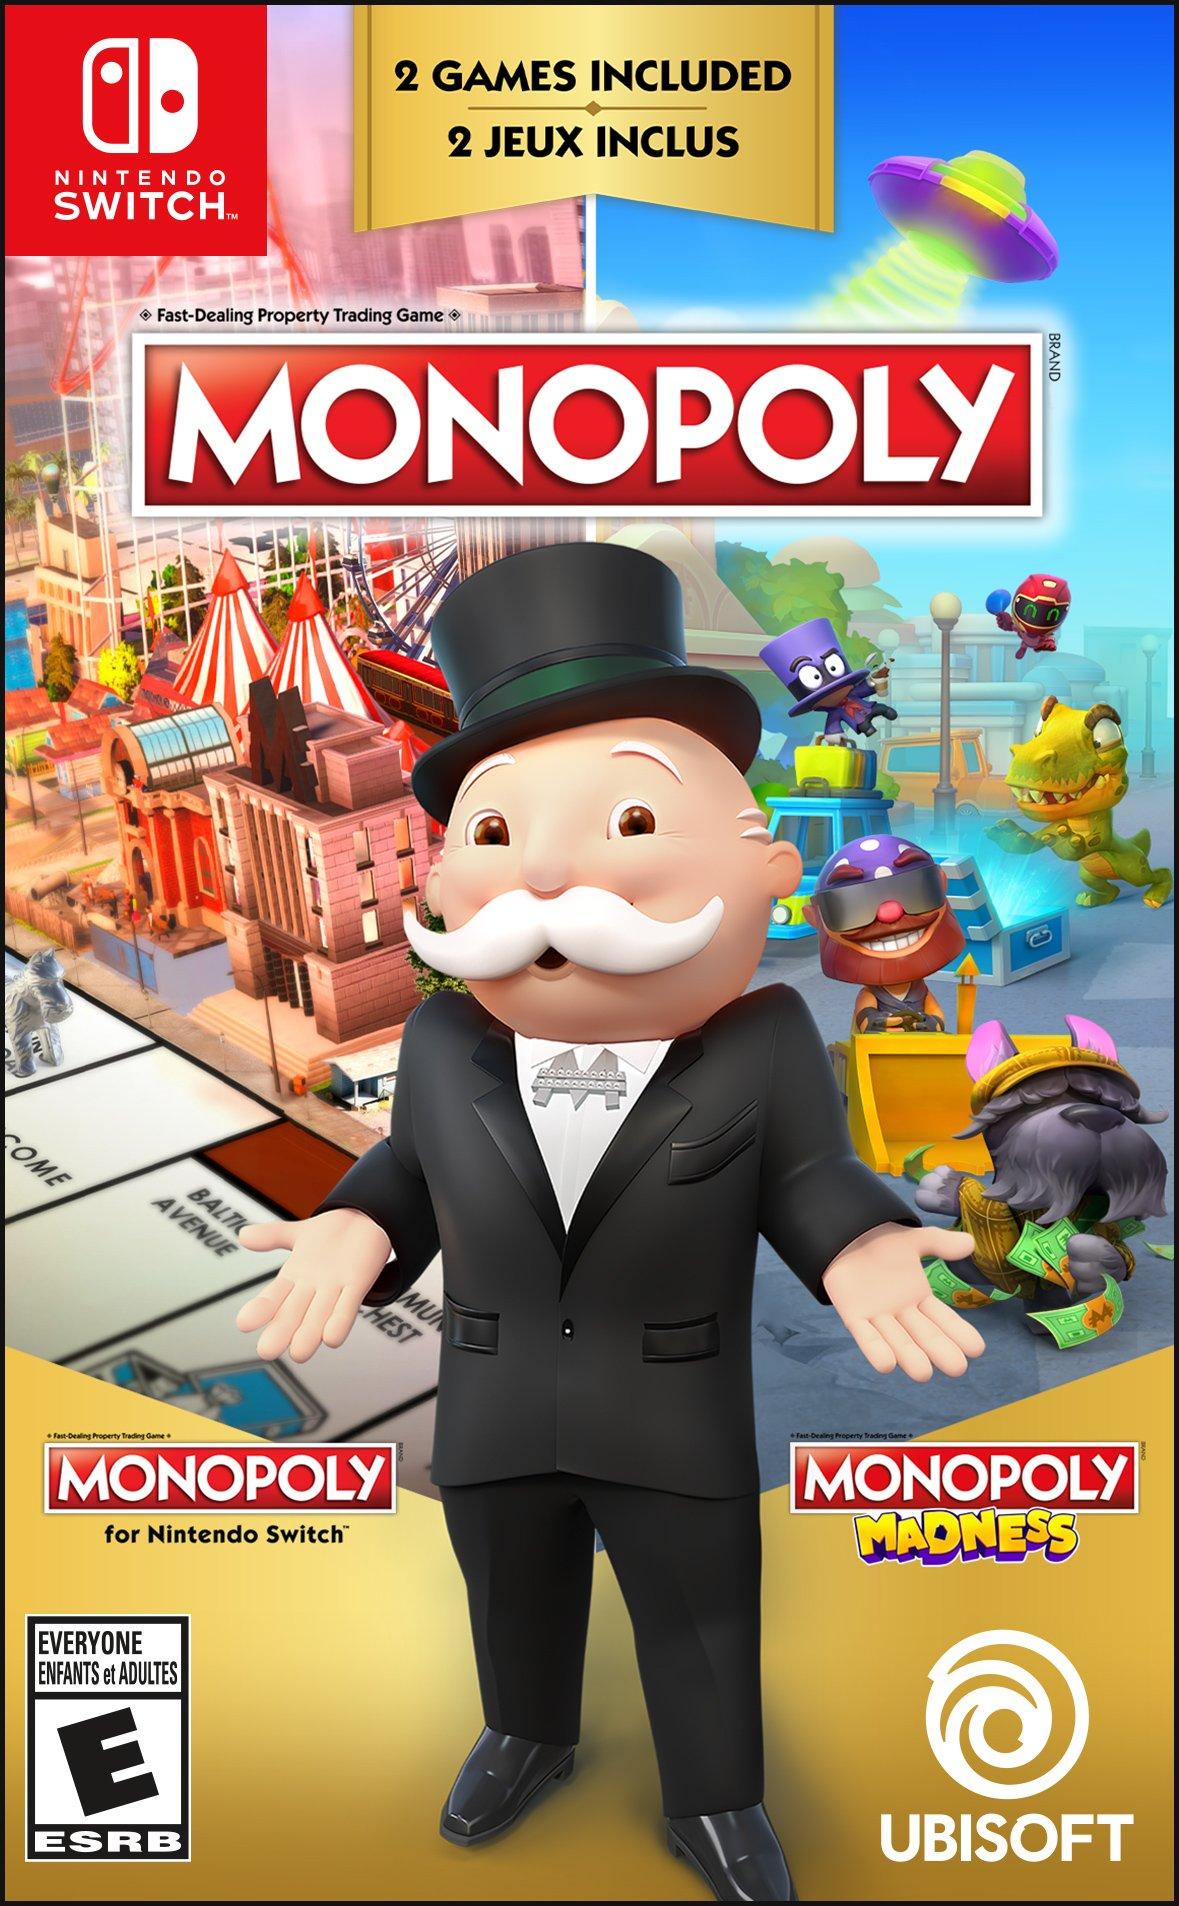 Switch | Madness - GameStop and | Monopoly Nintendo Monopoly Switch Nintendo